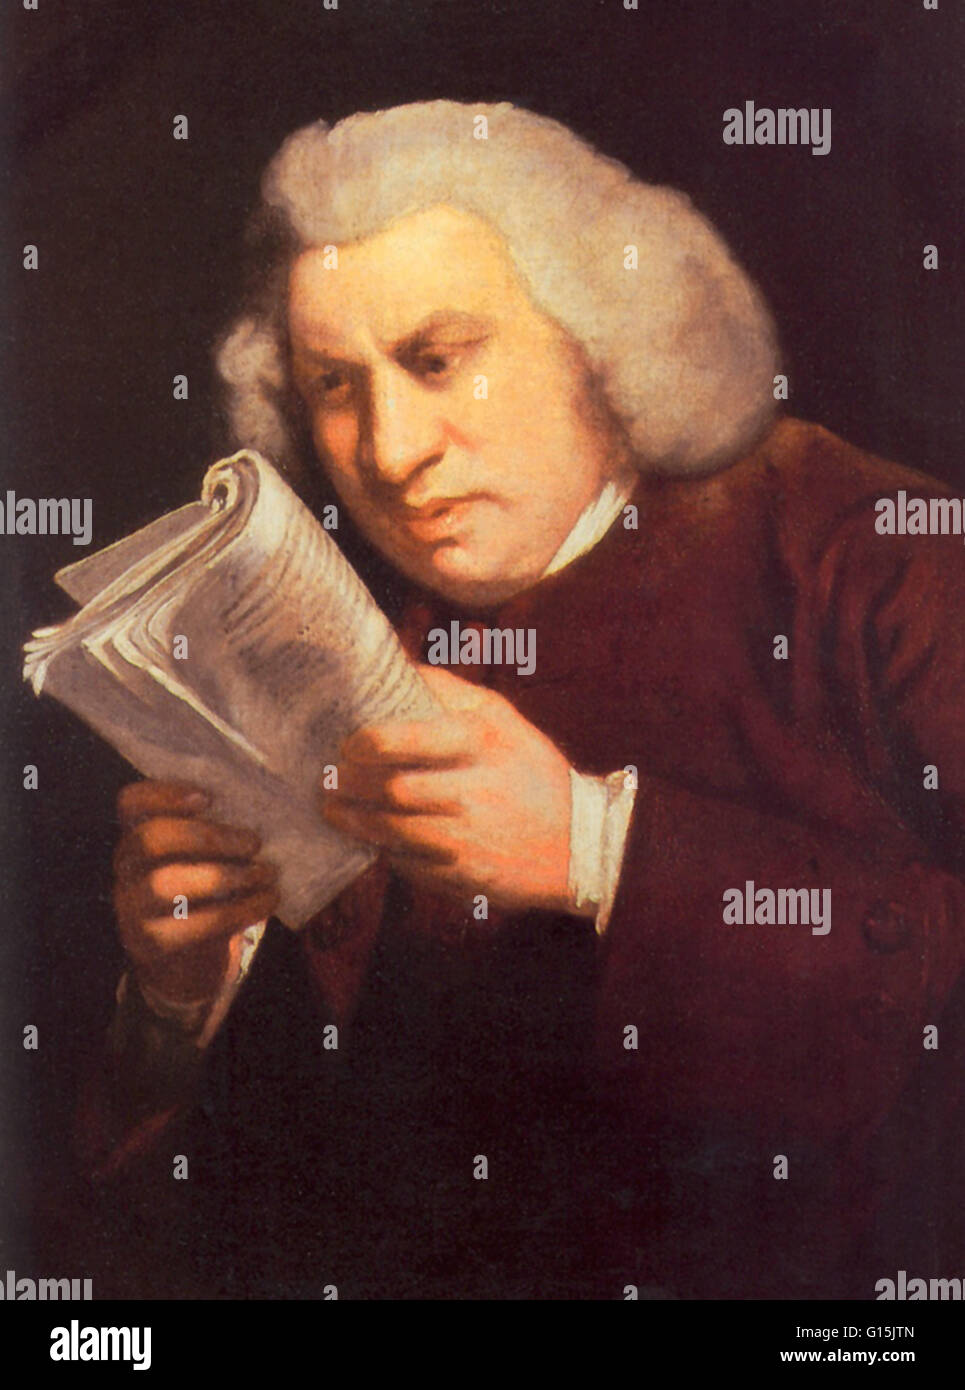 Samuel Johnson had a multitude of physical and psychological ailments. From the beginning of his life as a hypoxic newborn, he was troubled by numerous illnesses, including neonatal abscess of the buttocks, probable smallpox, and deafness in the left ear Stock Photo